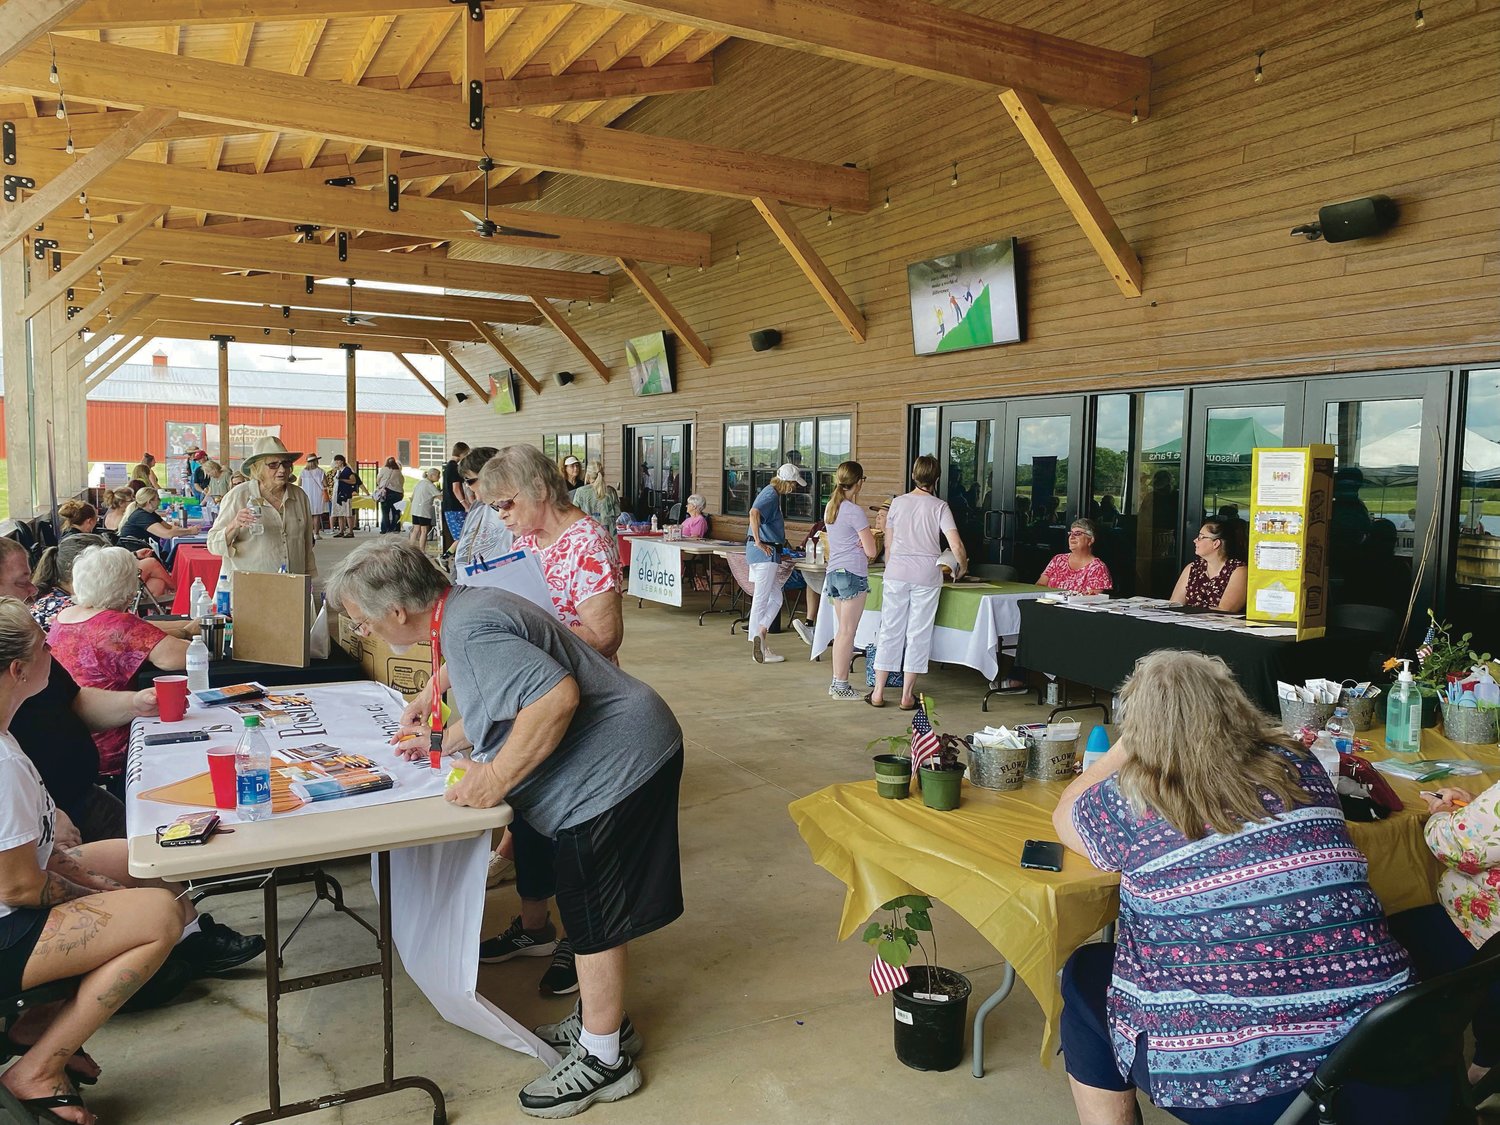 The summer event by Lebanon NAMI and Bennett Spring State Park was a hit for members of the community, pictured above visiting with around 25 nonprofit organizations and resources.